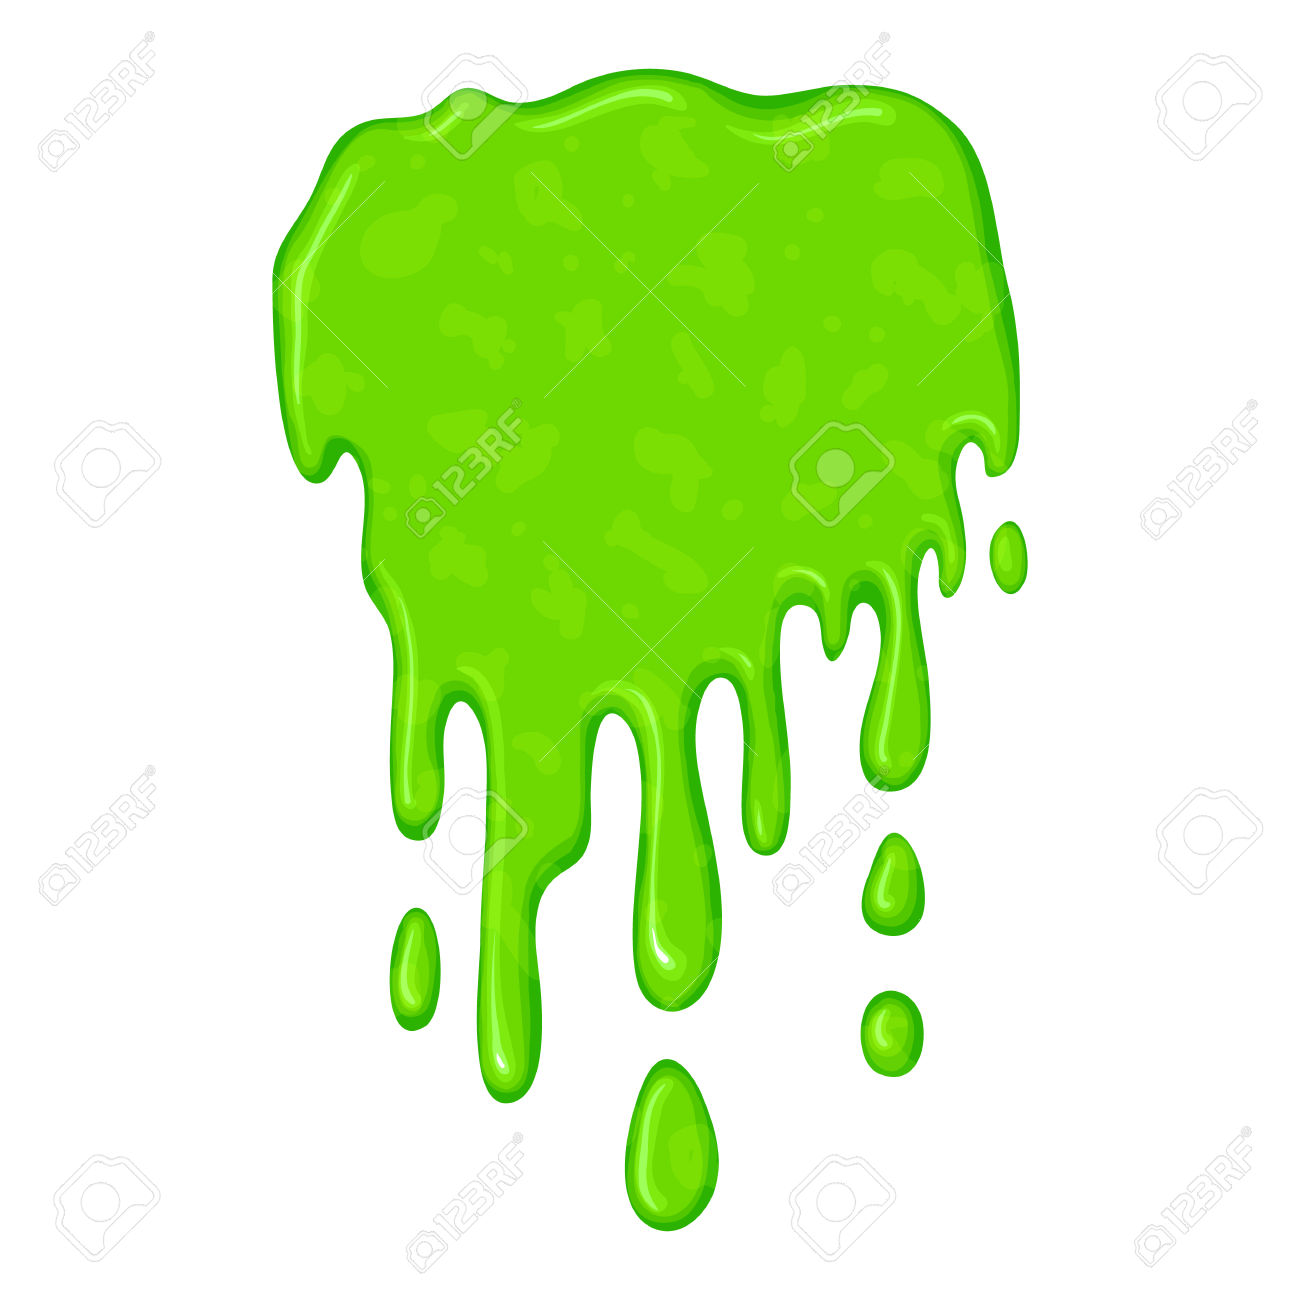 18,614 Slime Stock Illustrations, Cliparts And Royalty Free Slime.